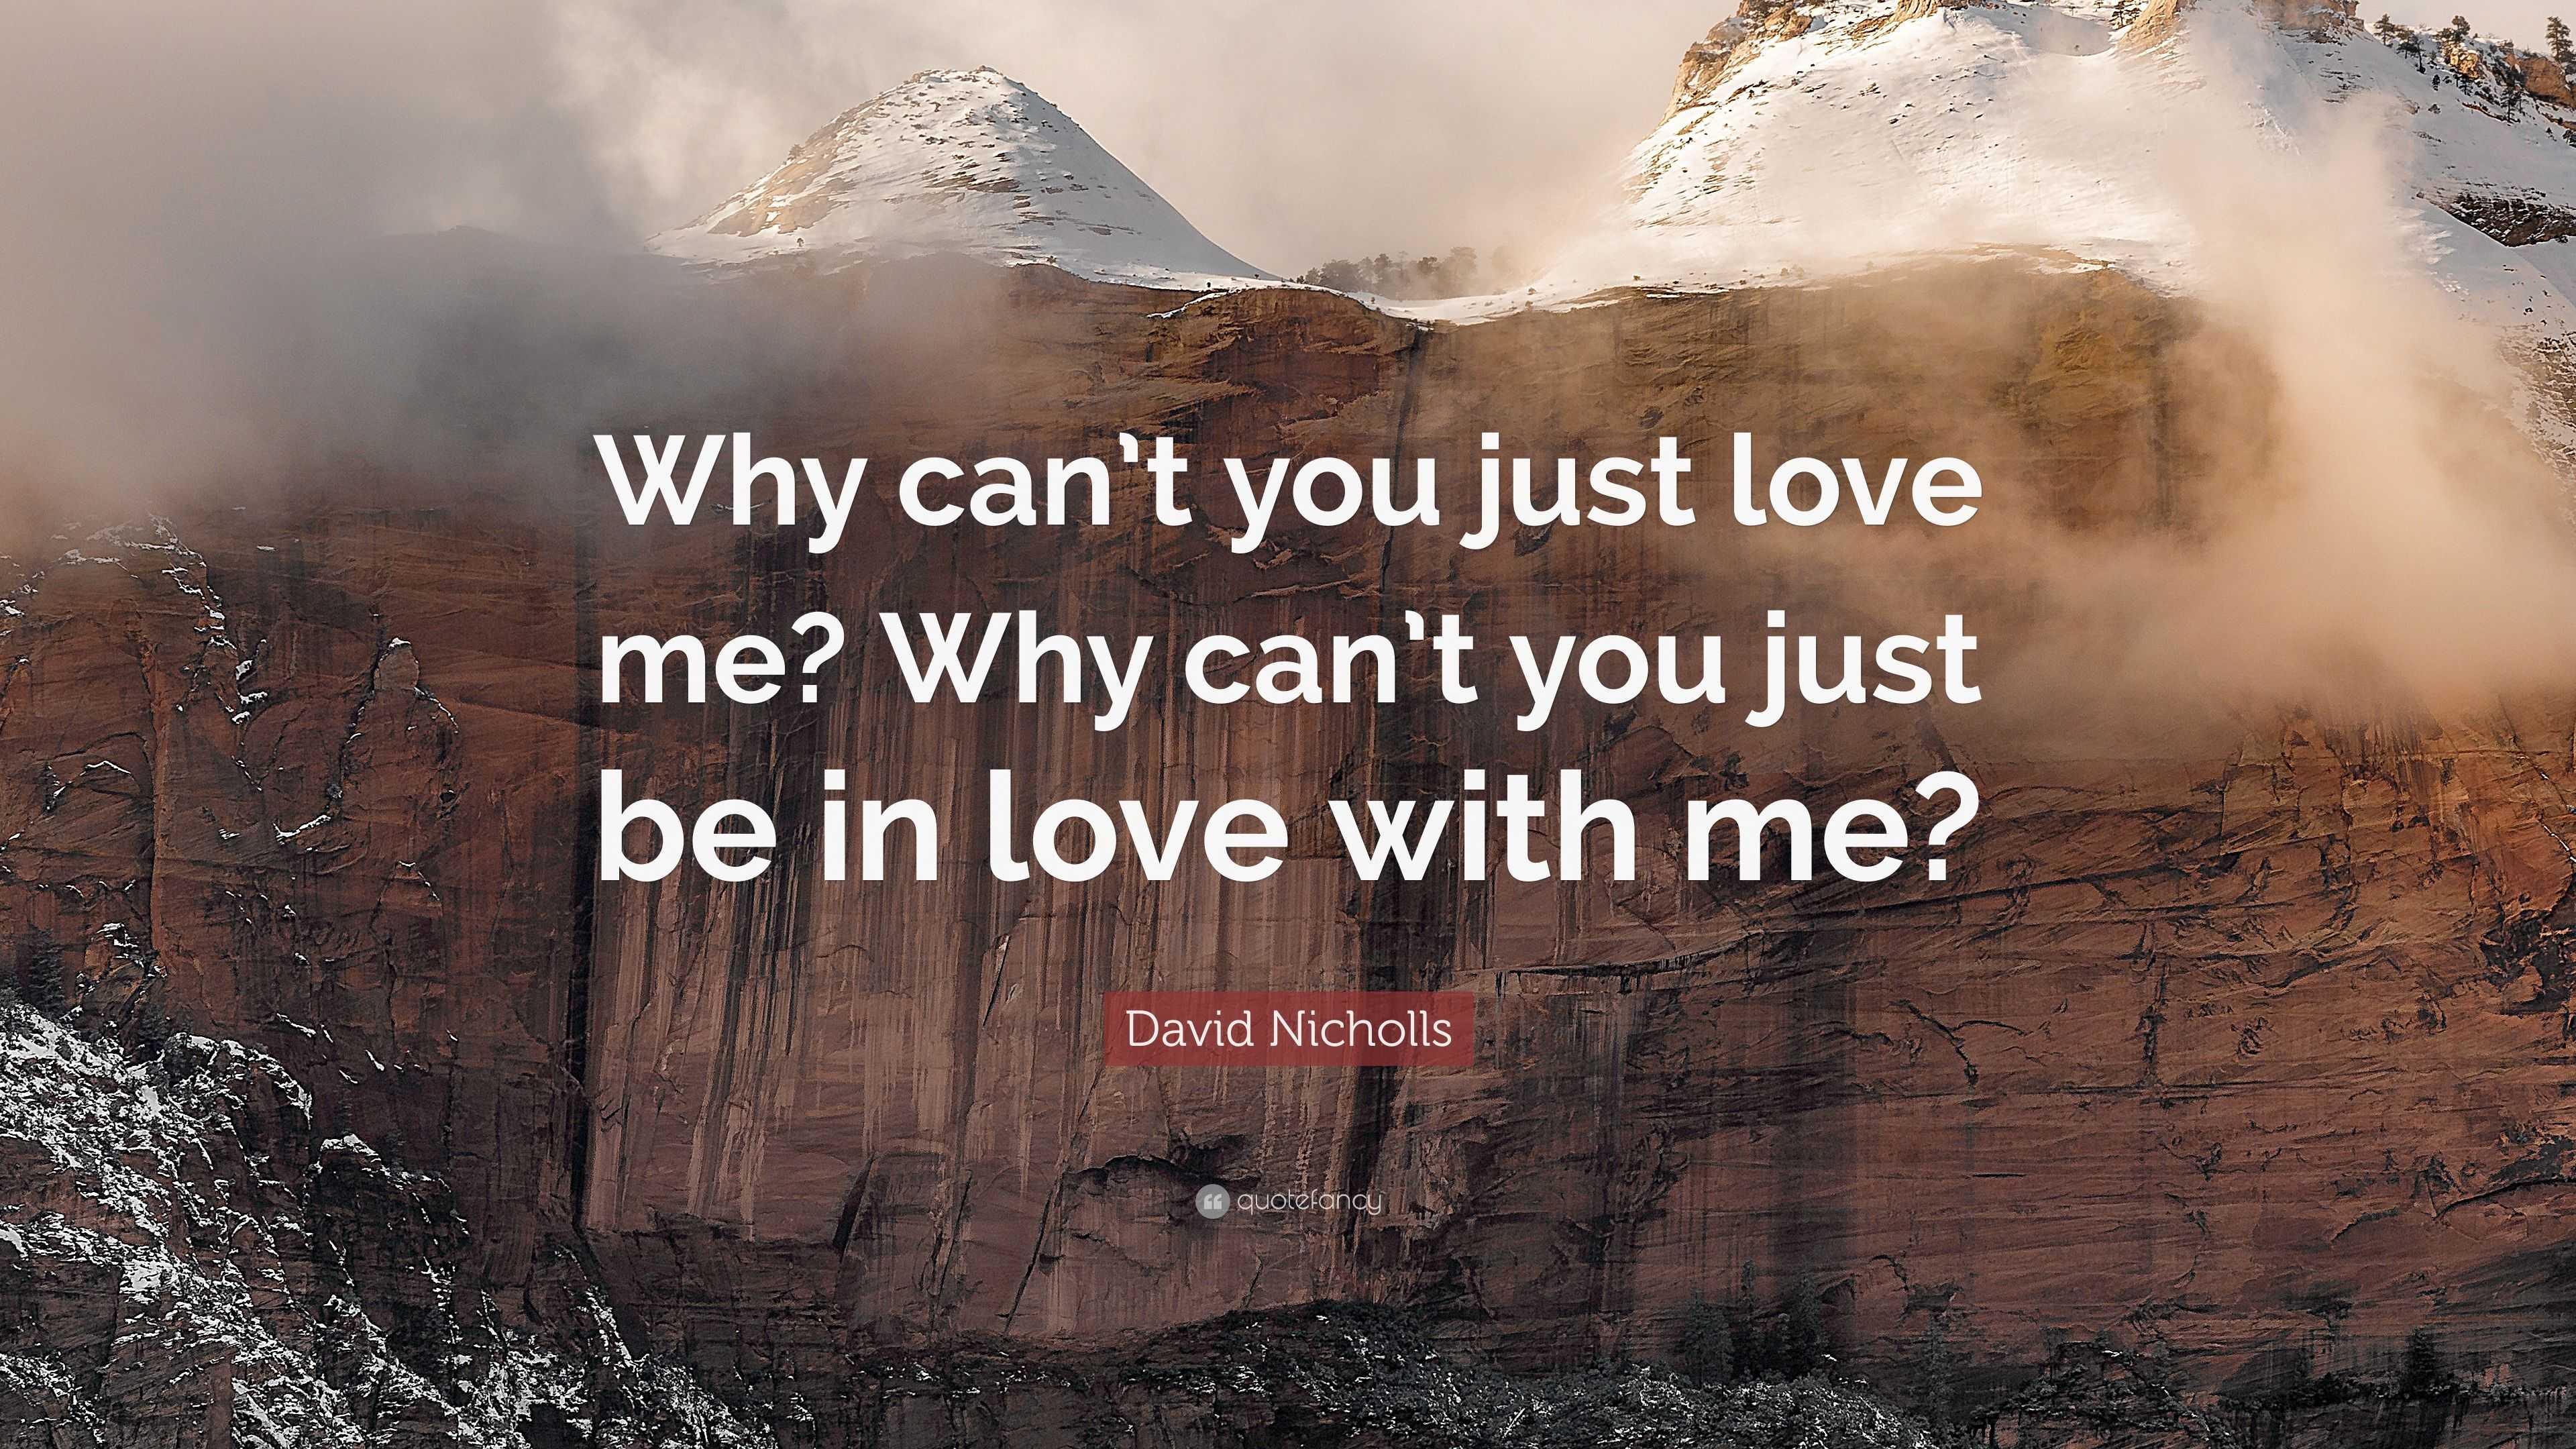 David Nicholls Quote: “Why can't you just love me? Why can't you just be